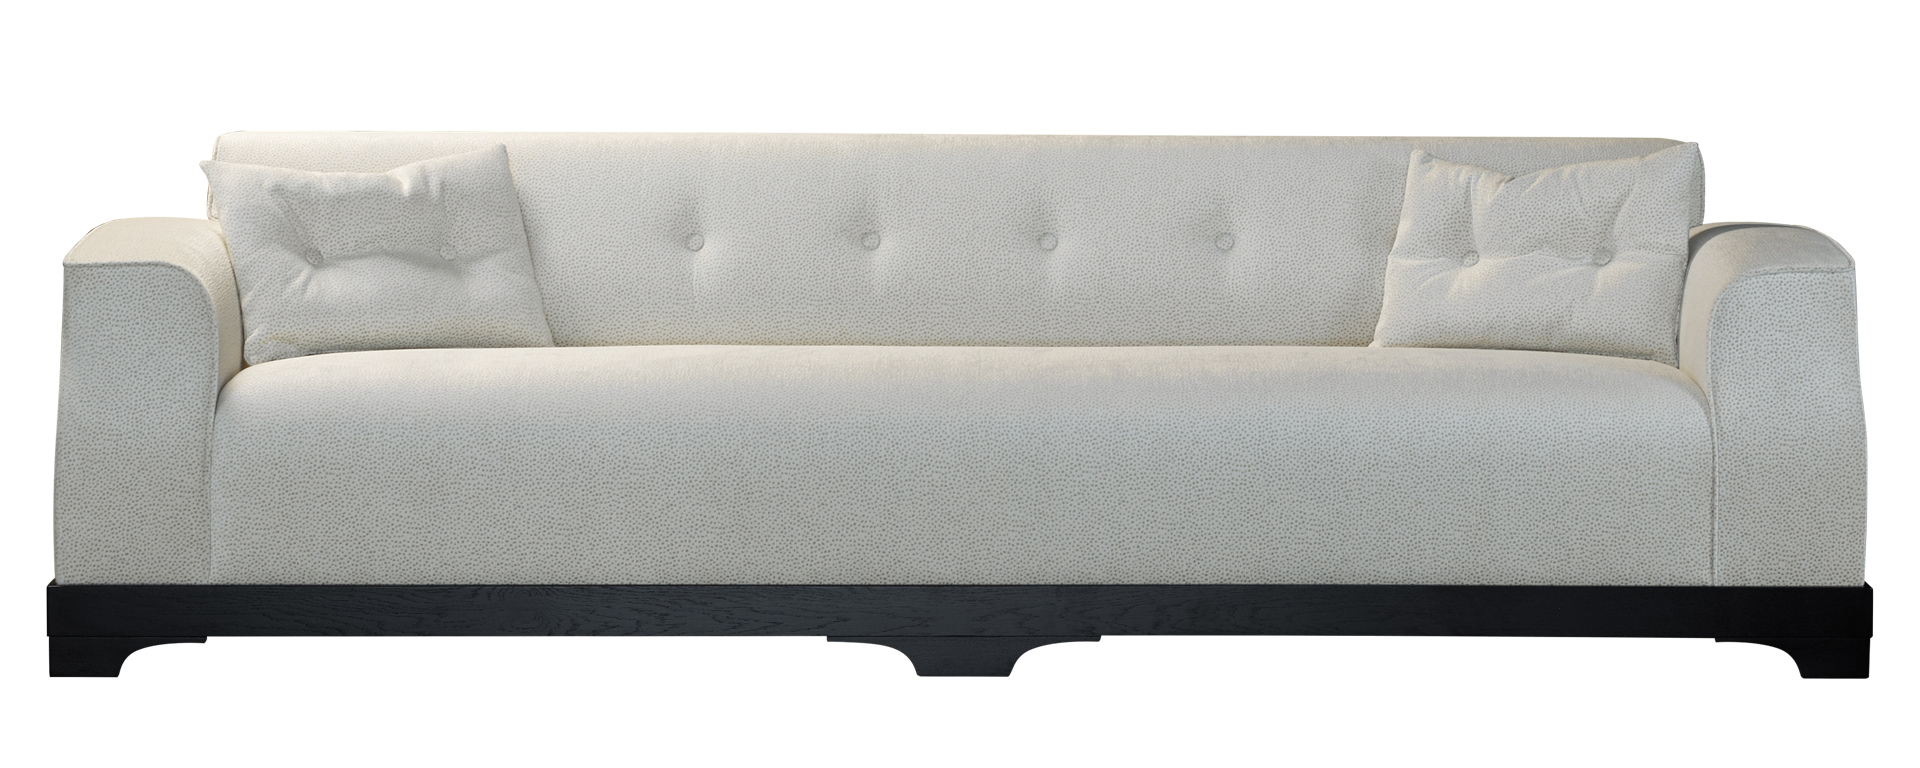 Mogador is a wooden sofa covered in fabric or leather with capitonnè backrest and cushions, from Promemoria's catalogue | Promemoria